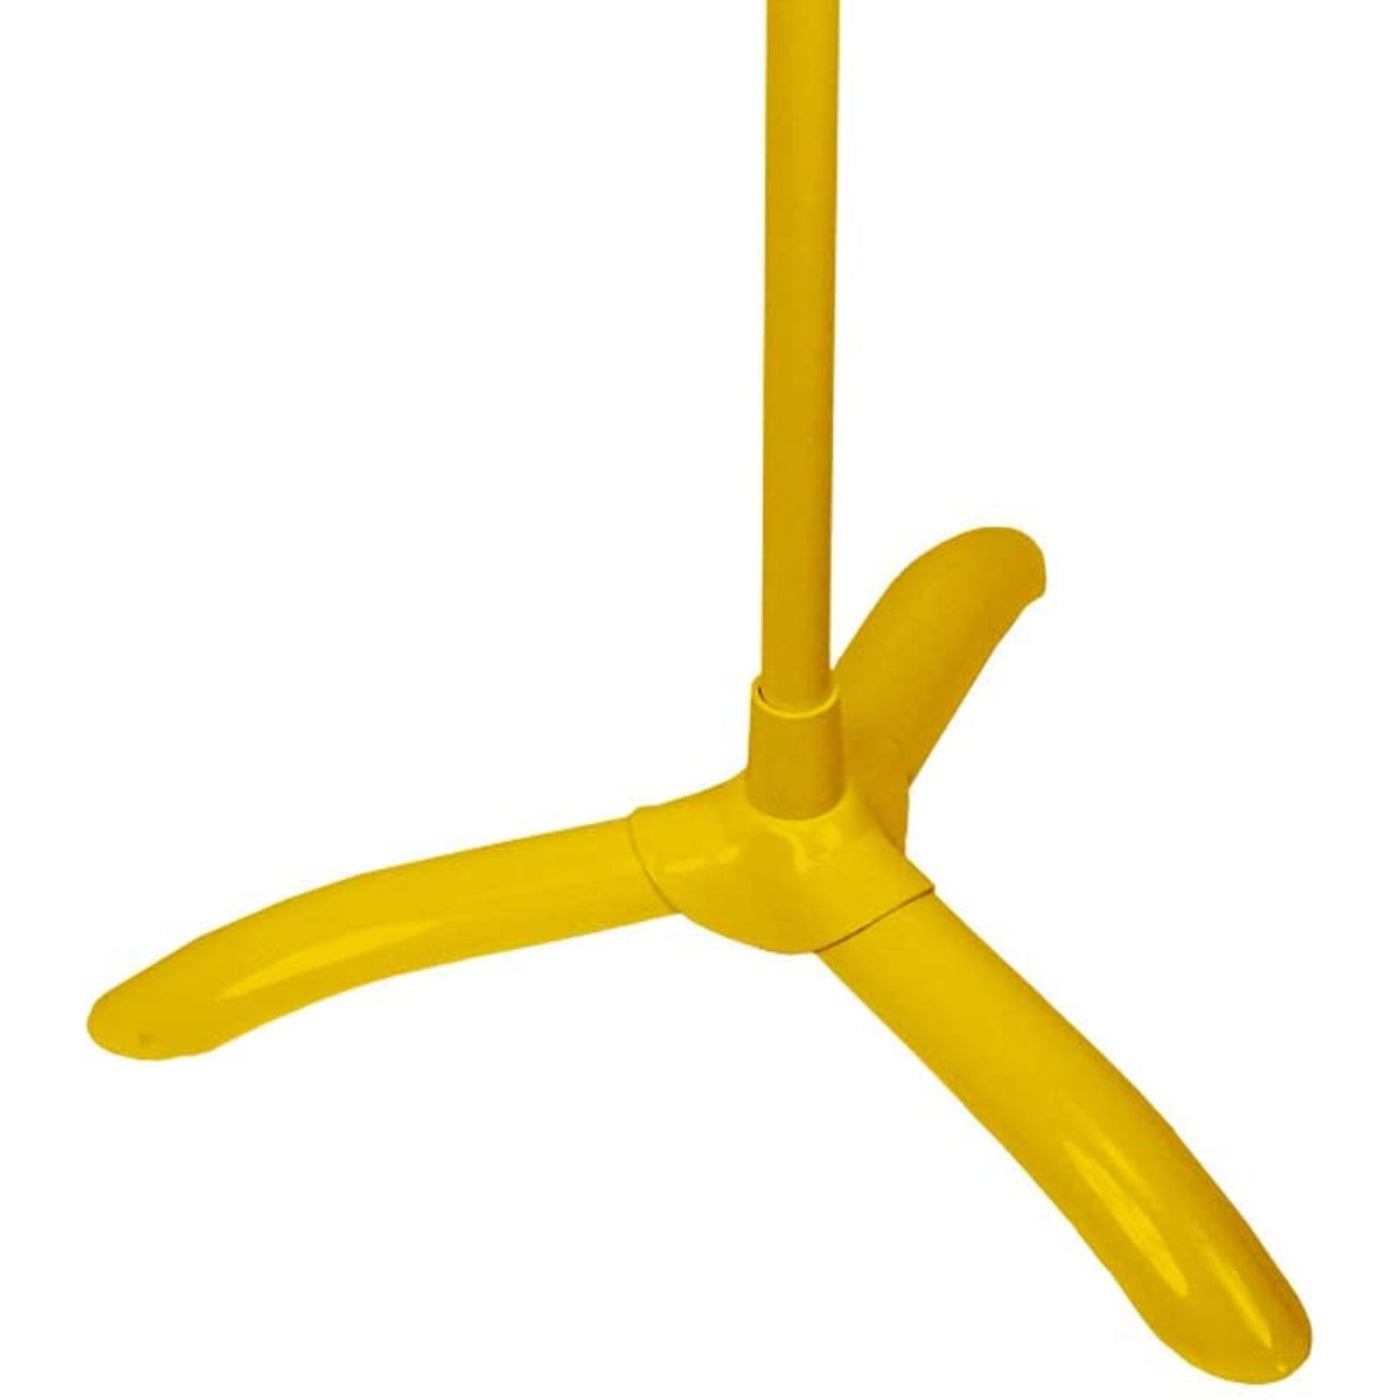 Manhasset Adjustable Height Universal Chorale Microphone Stand, Yellow (3016YEL)